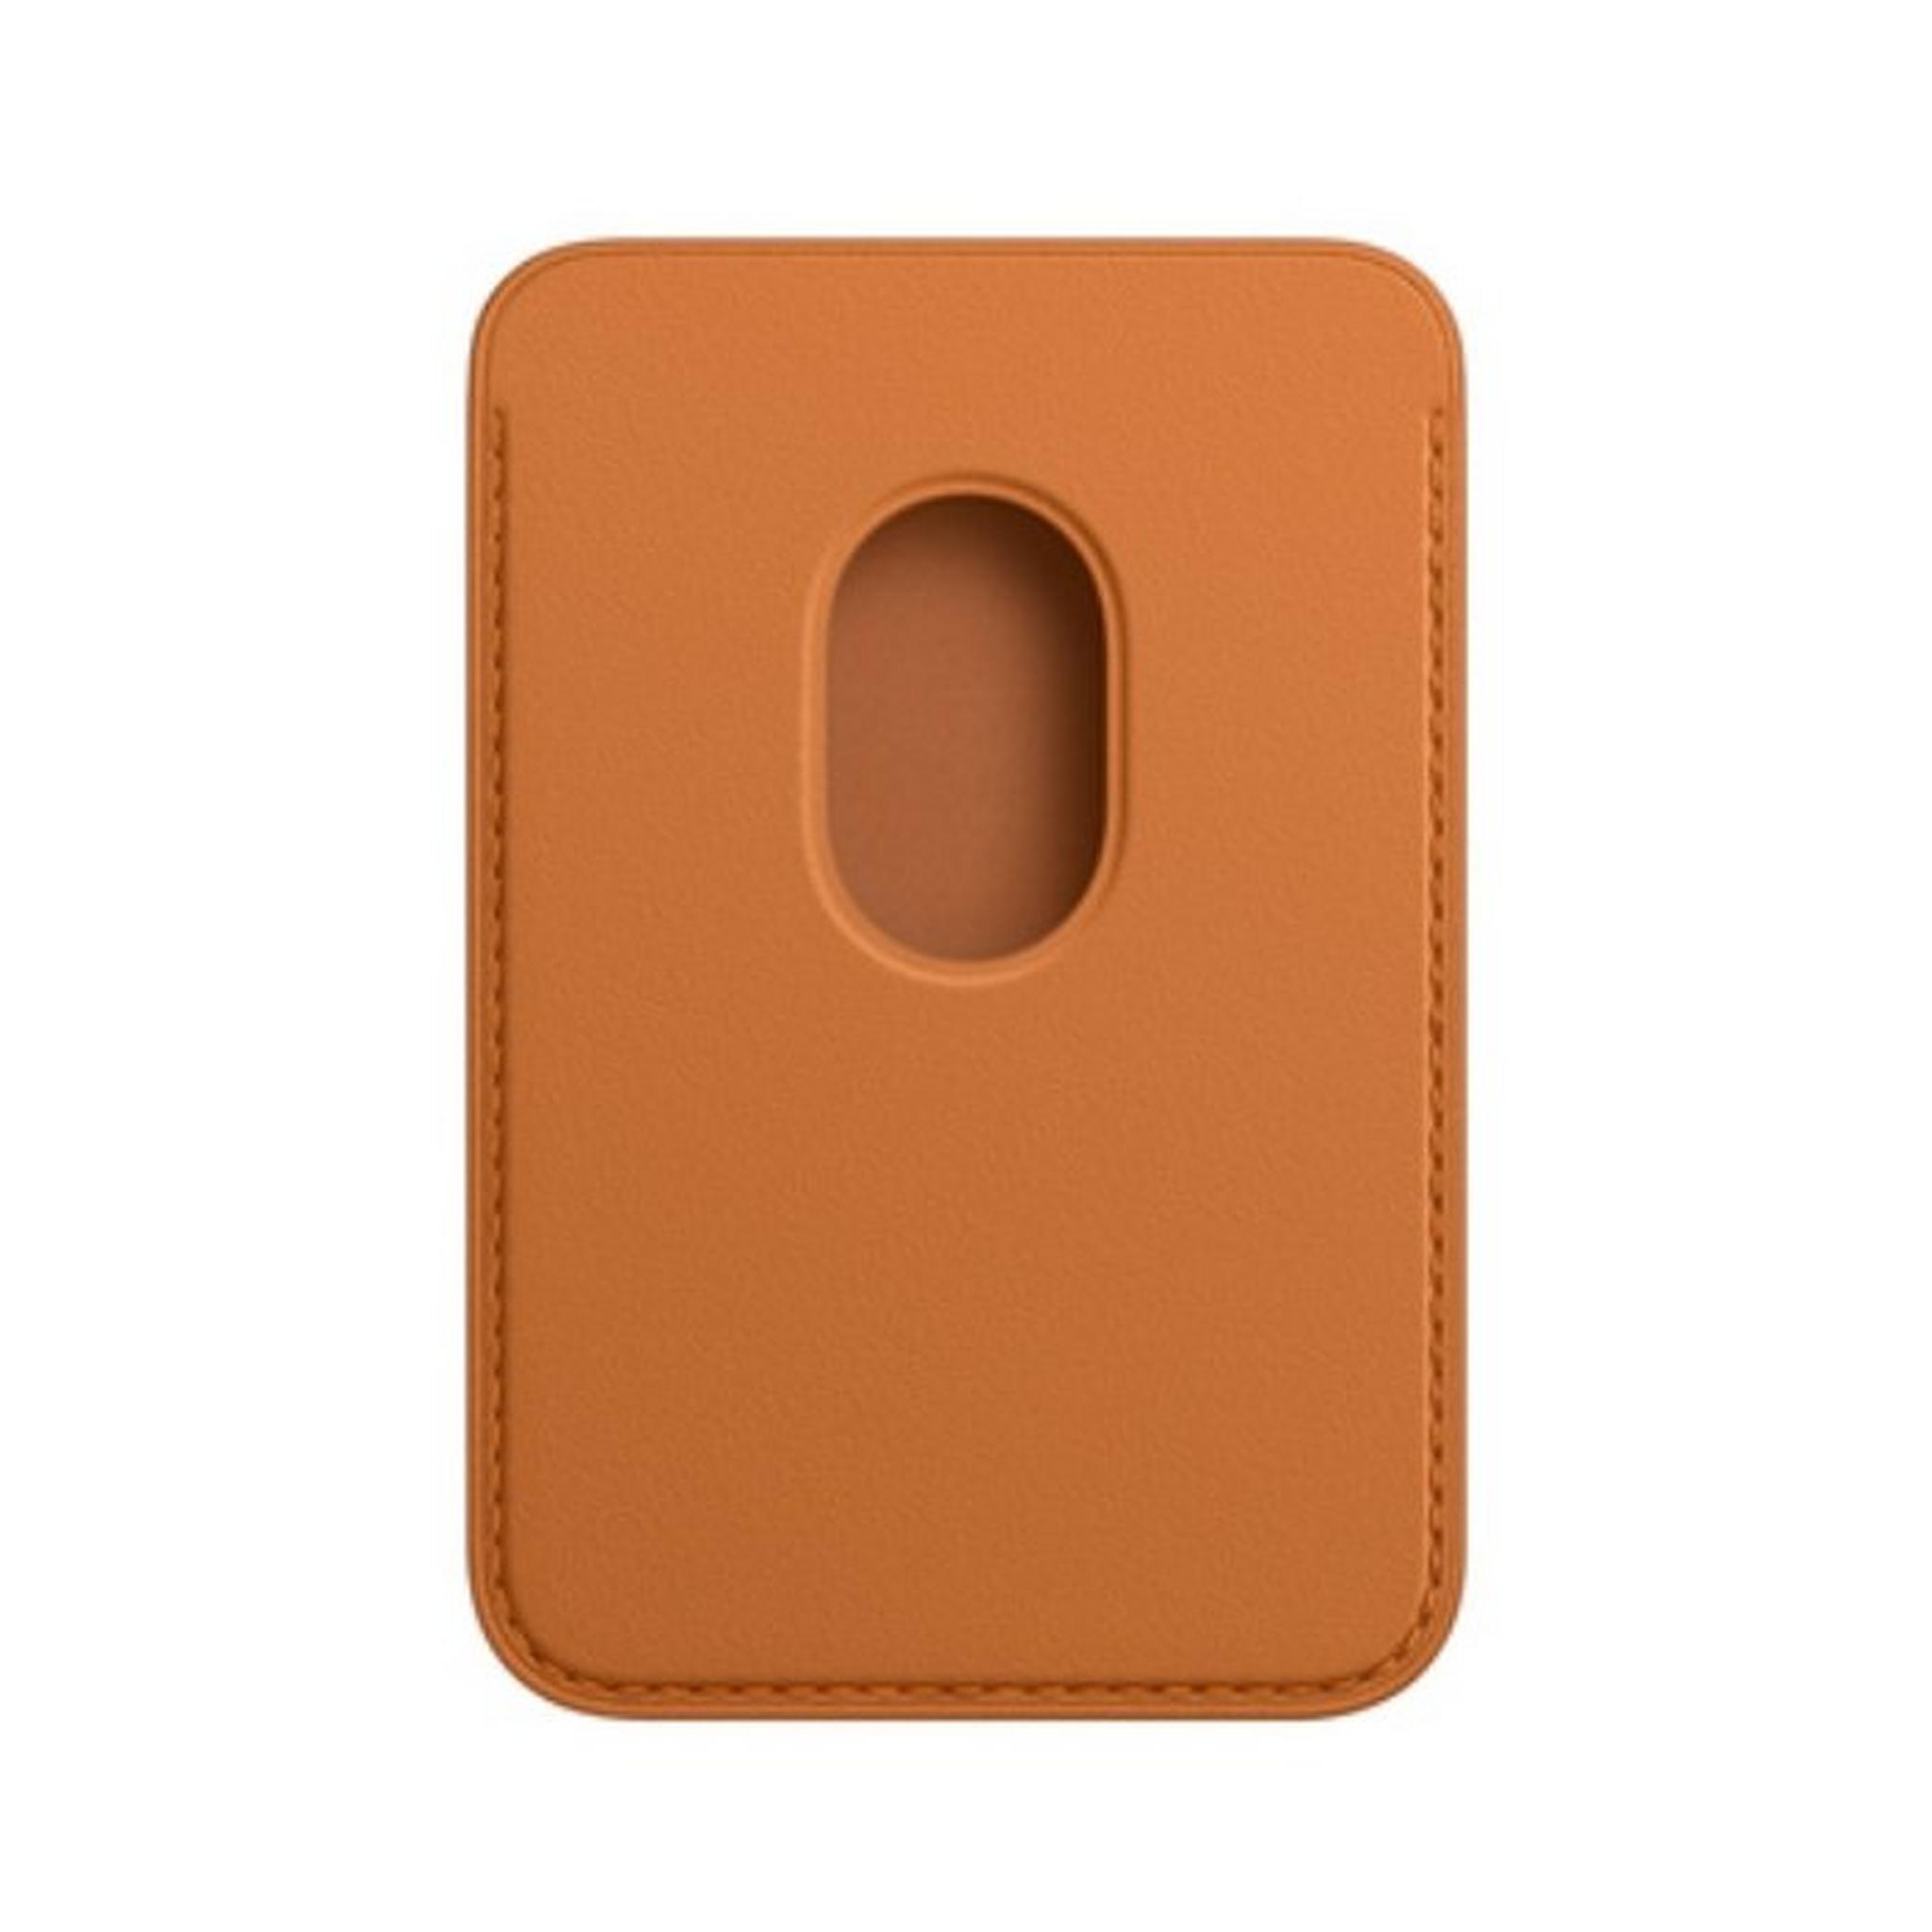 Apple iPhone Magsafe Leather Wallet - Golden Brown